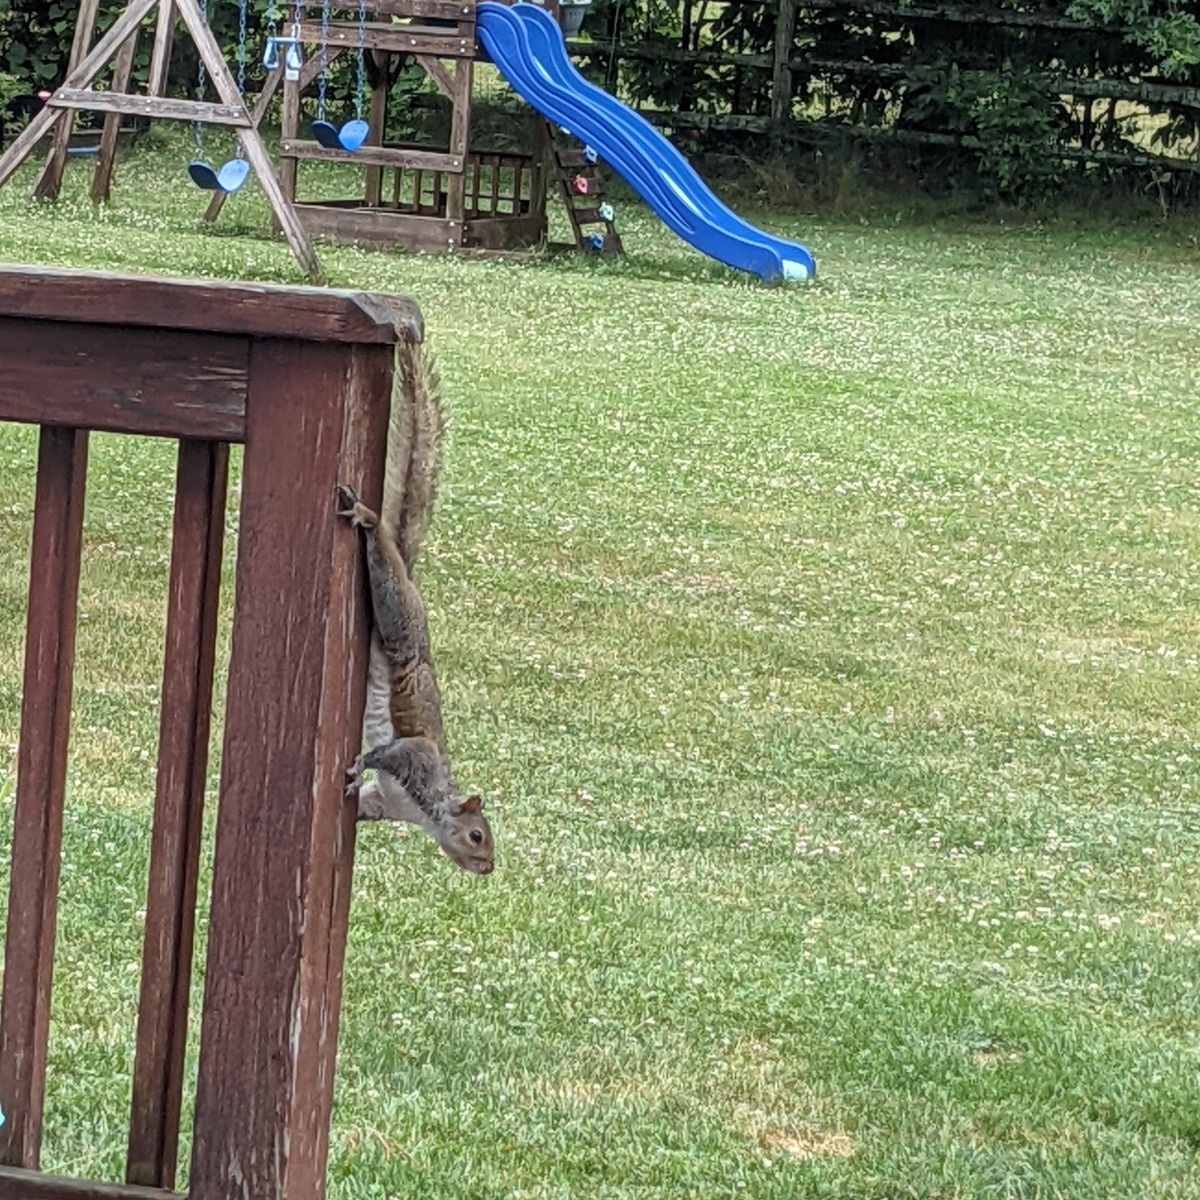 Squirrel climbing on deck - How to Deter Squirrels from Garden and Backyard spaces